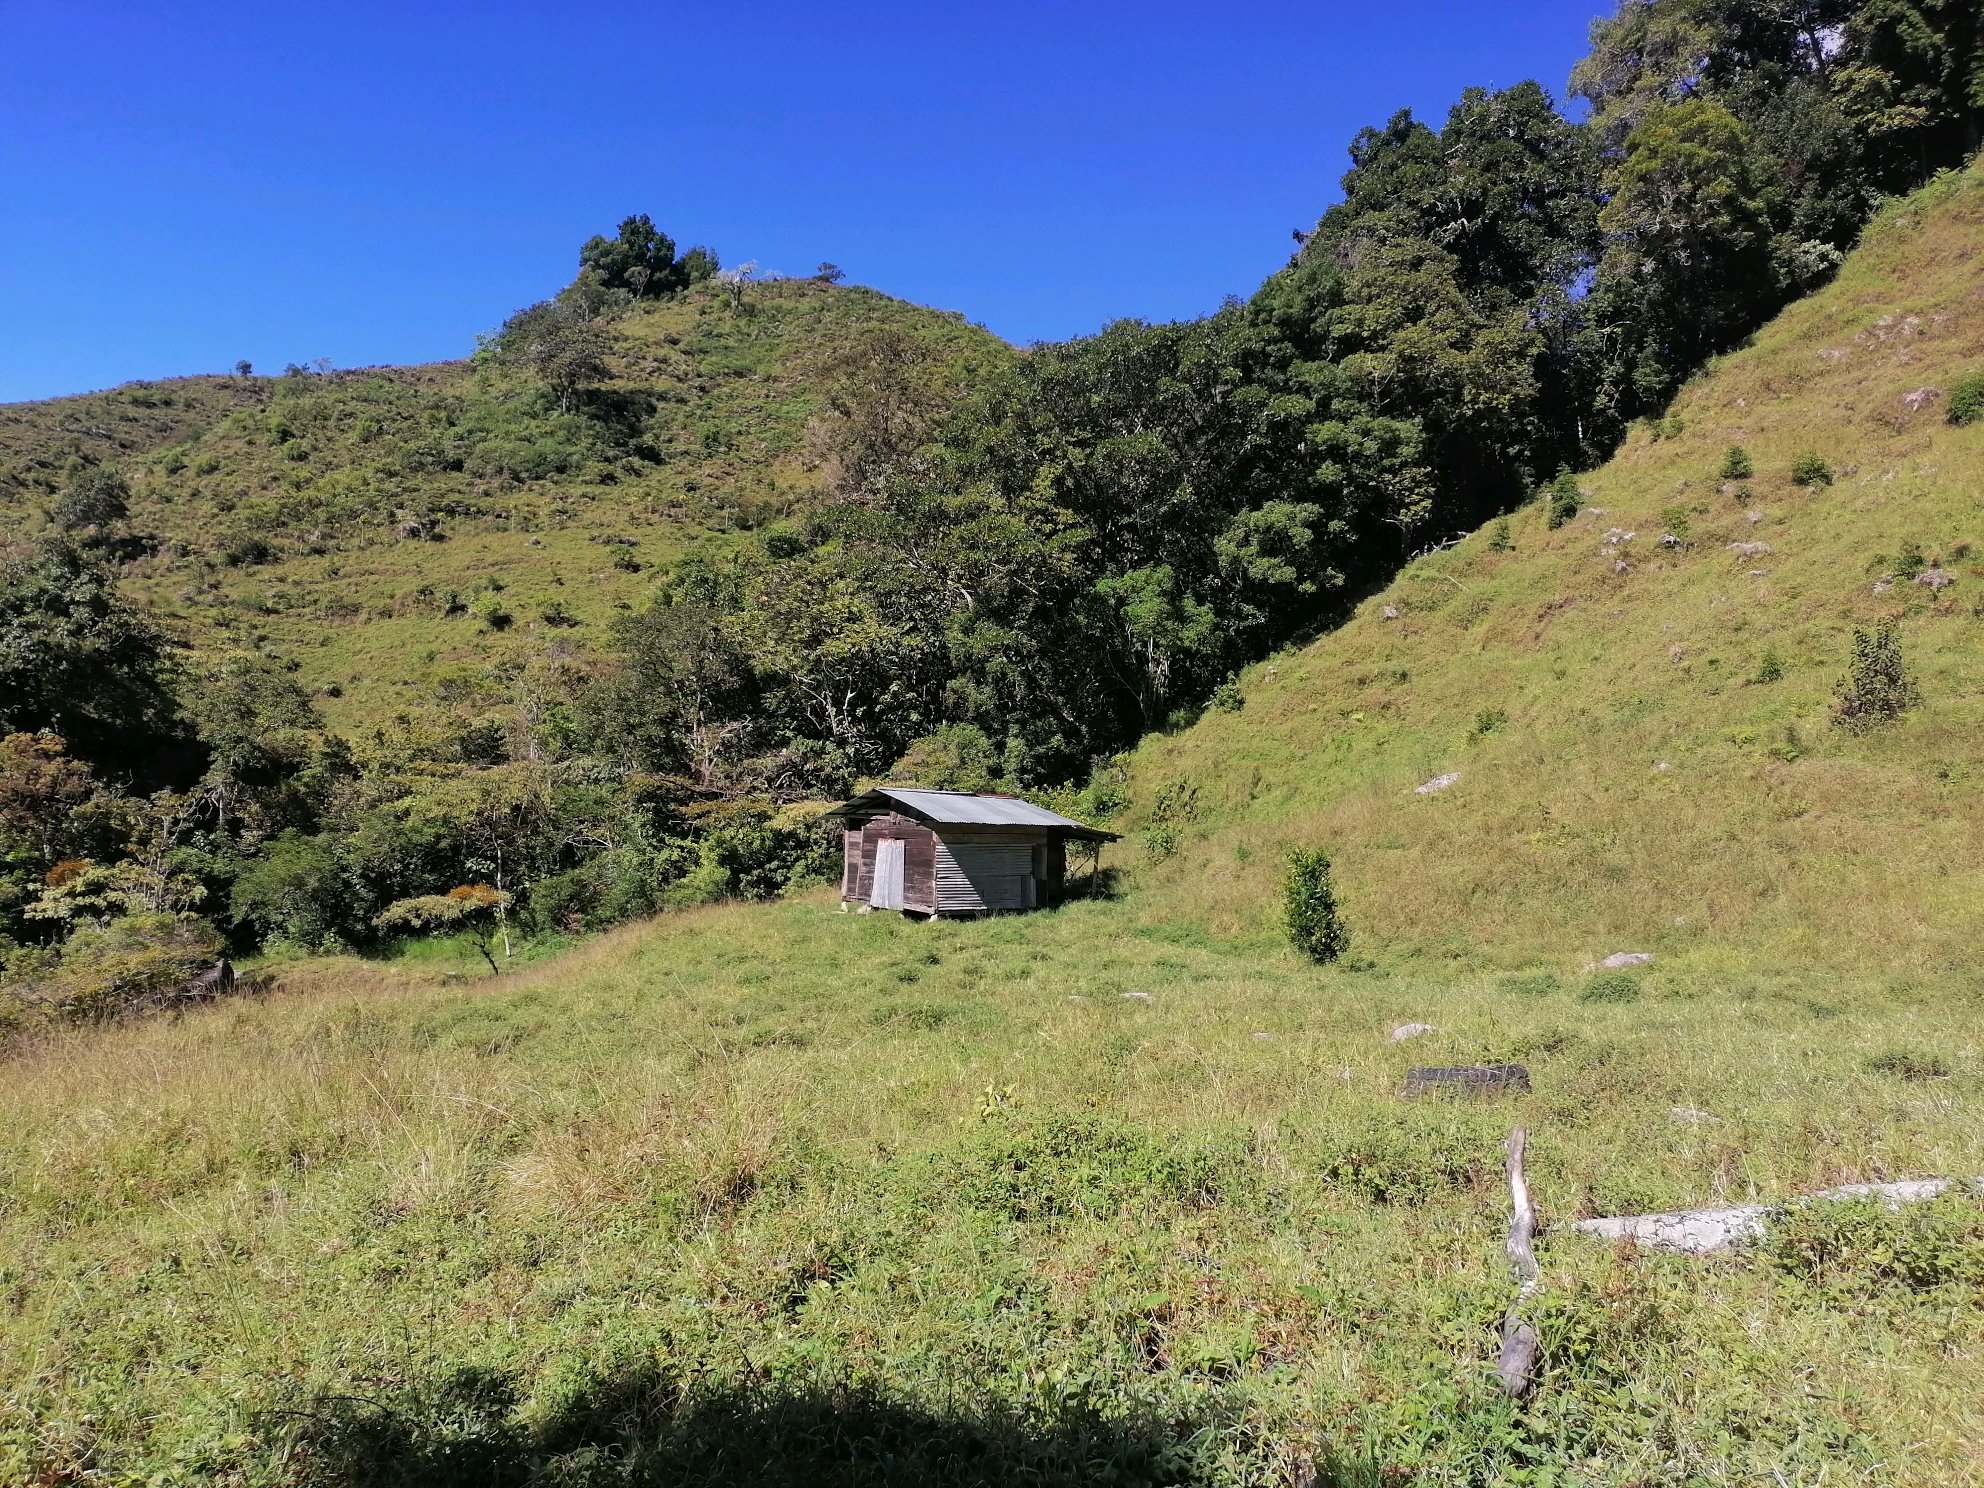 Small shack at the foot of the Rio Blanco 